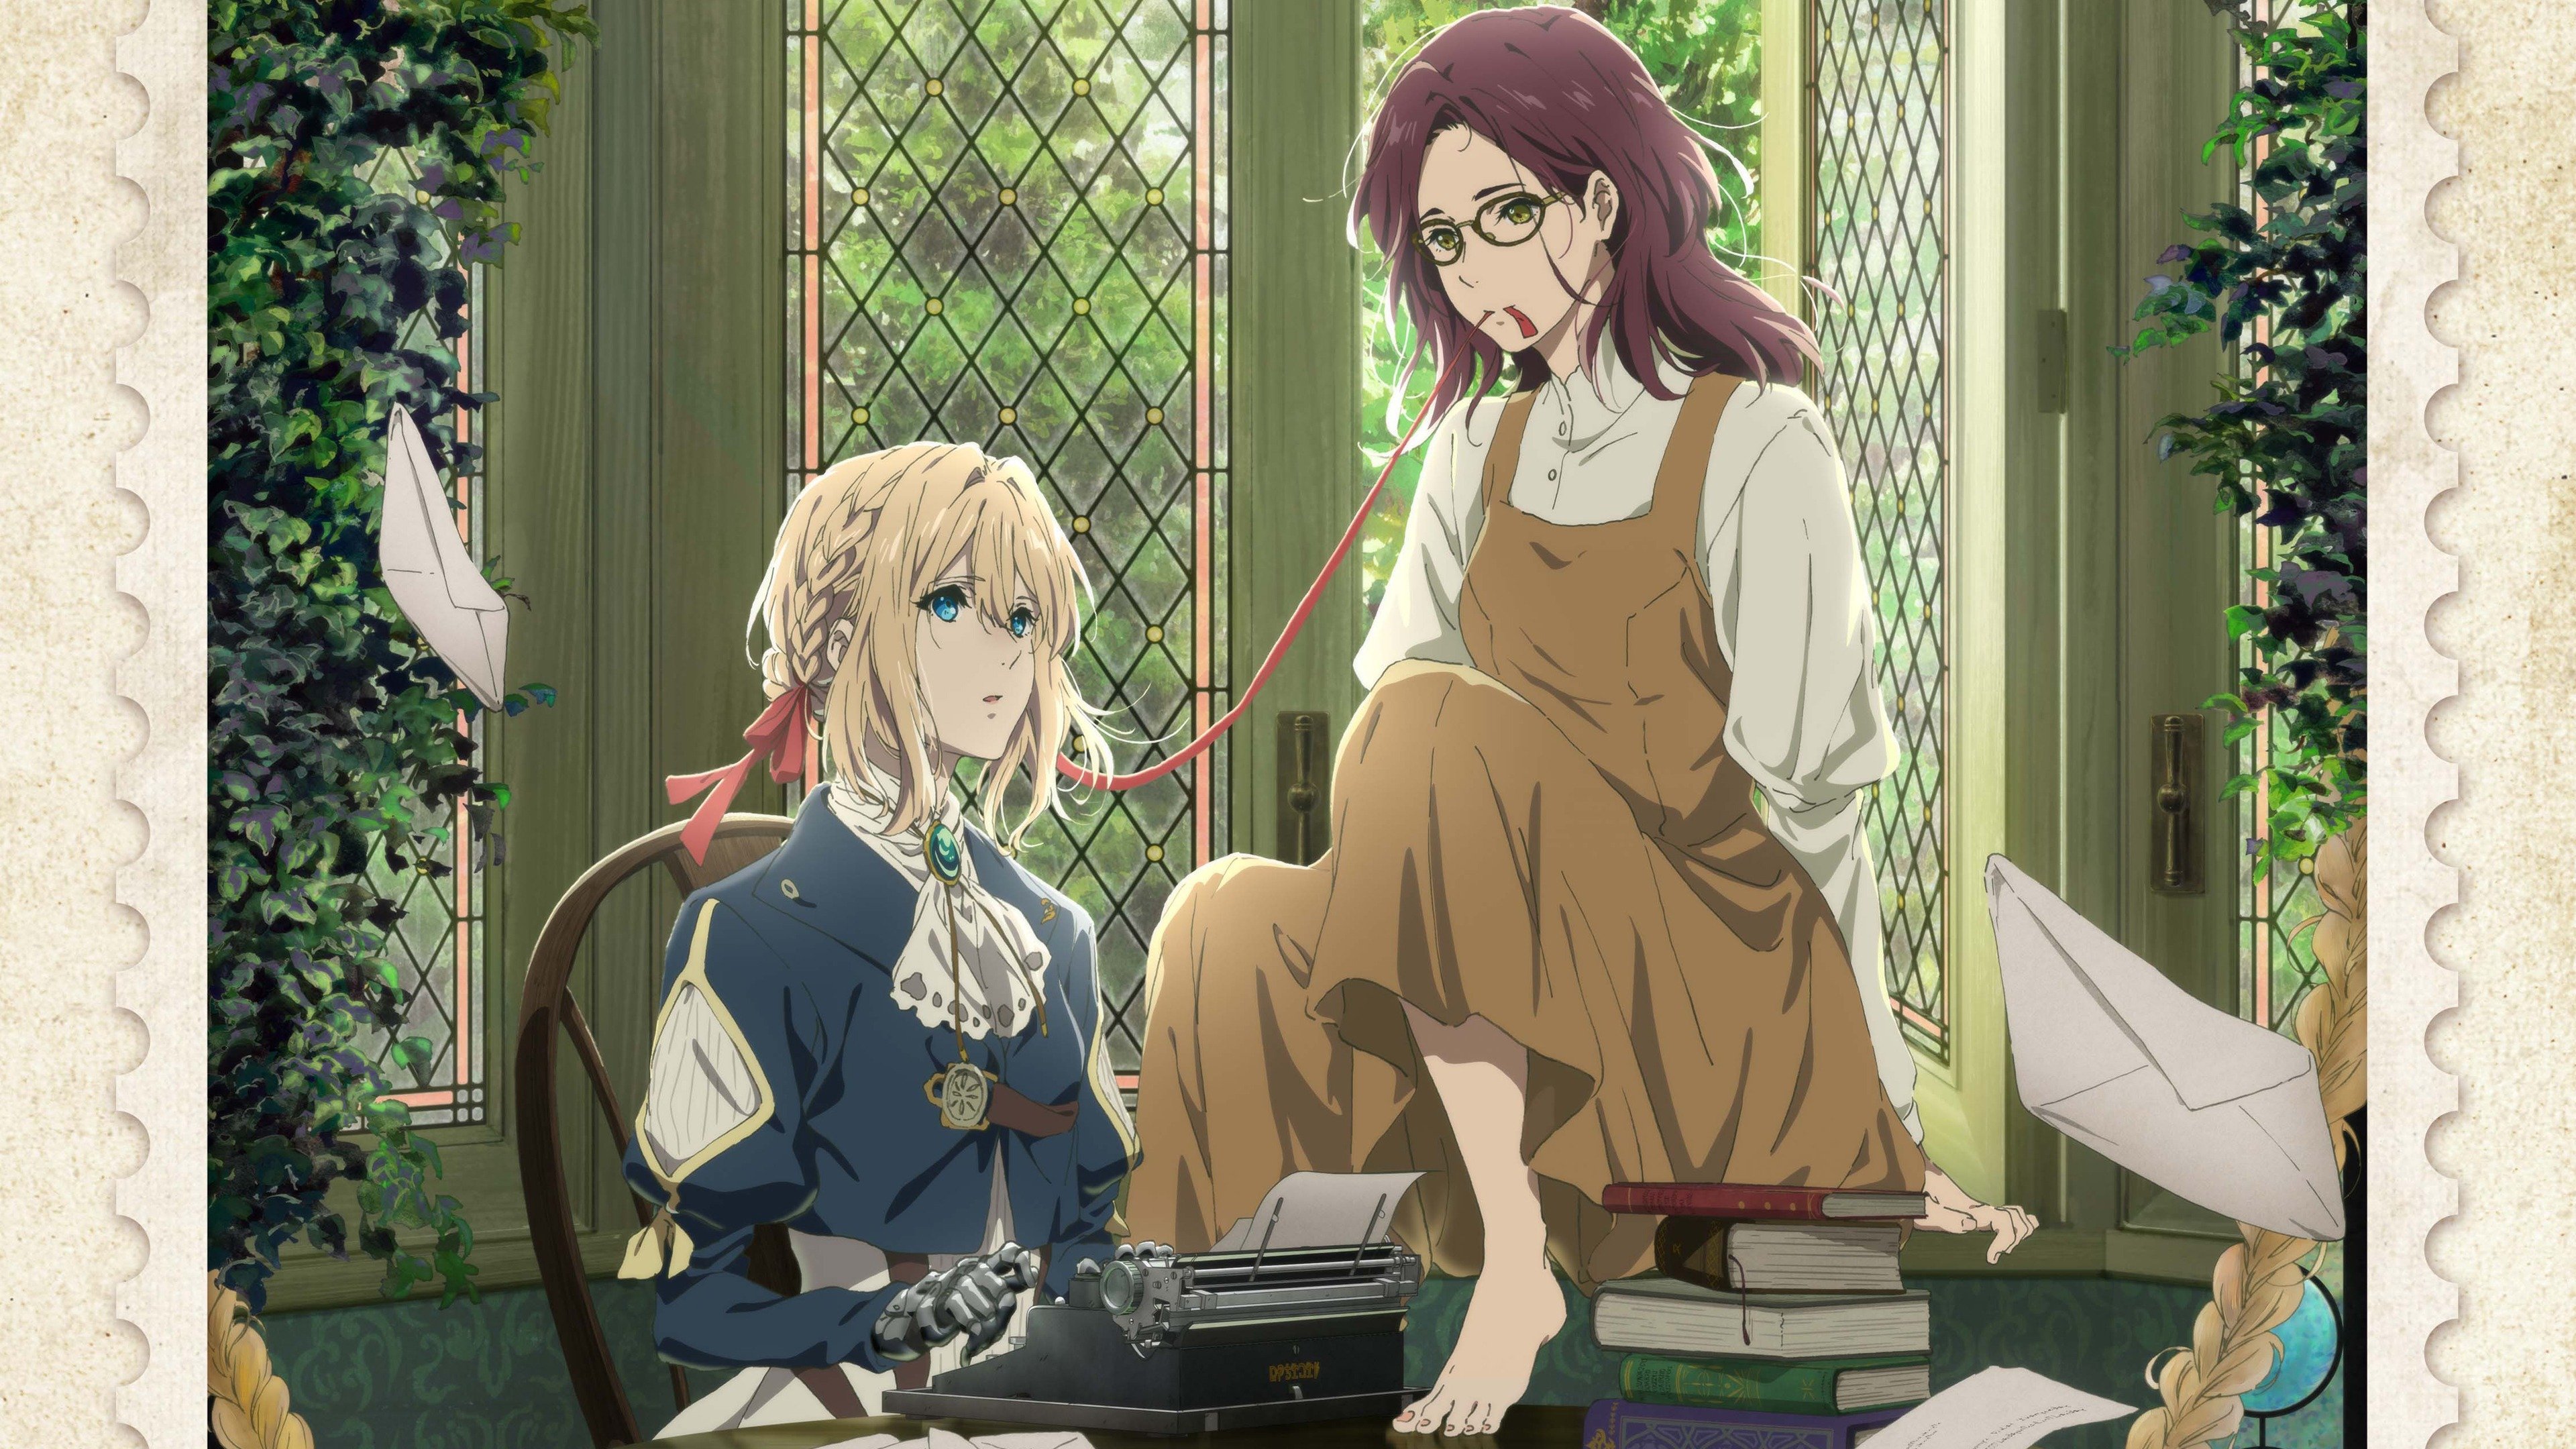 Should I watch Violet Evergarden the movie or the show/anime? - Quora